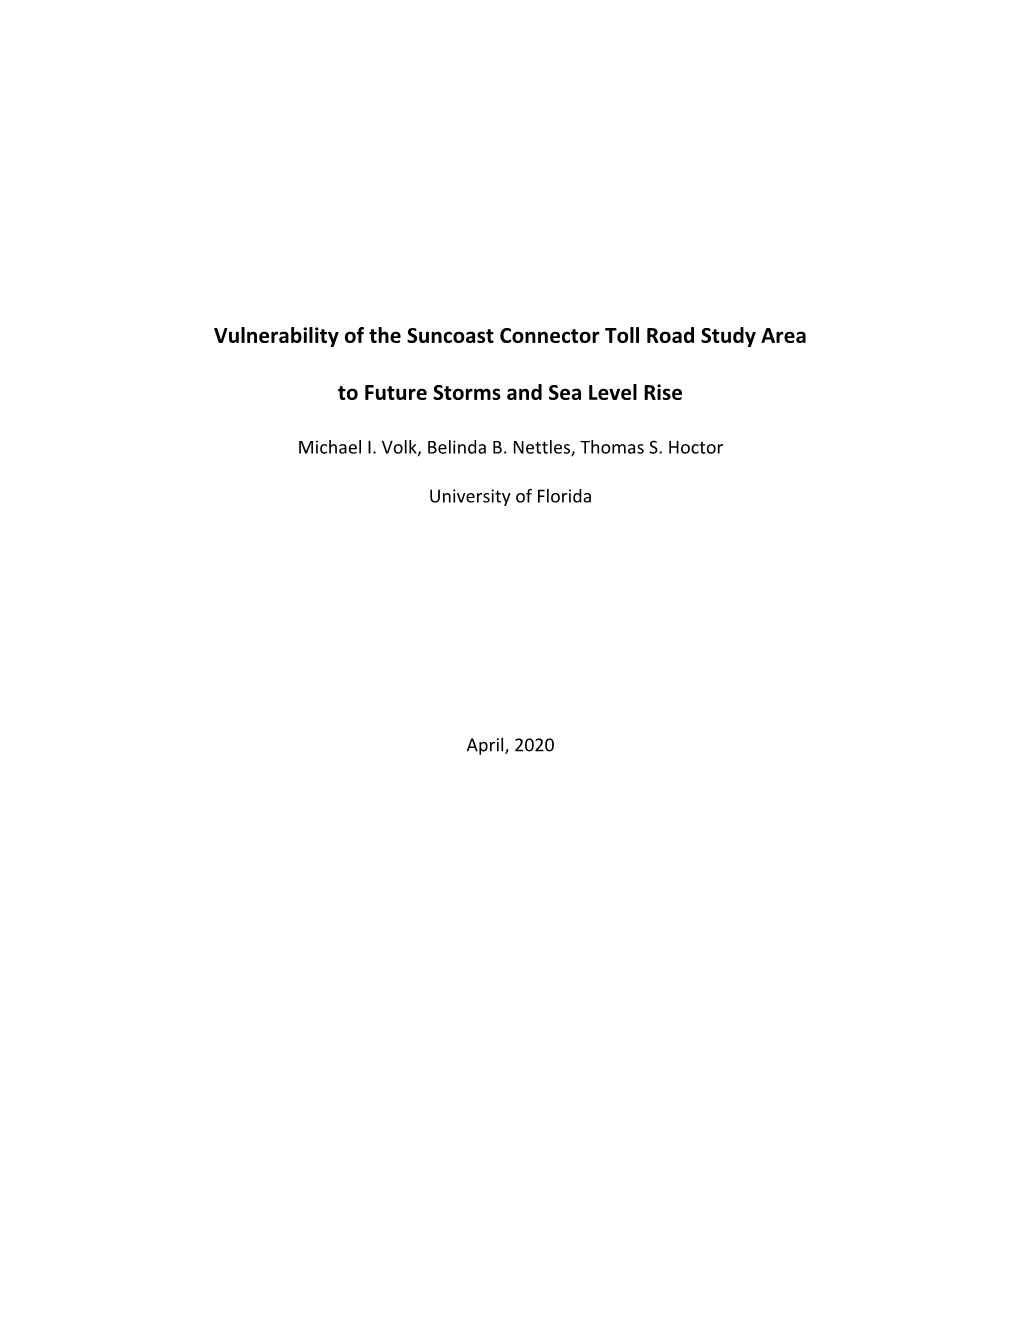 Vulnerability of the Suncoast Connector Toll Road Study Area to Future Storms and Sea Level Rise